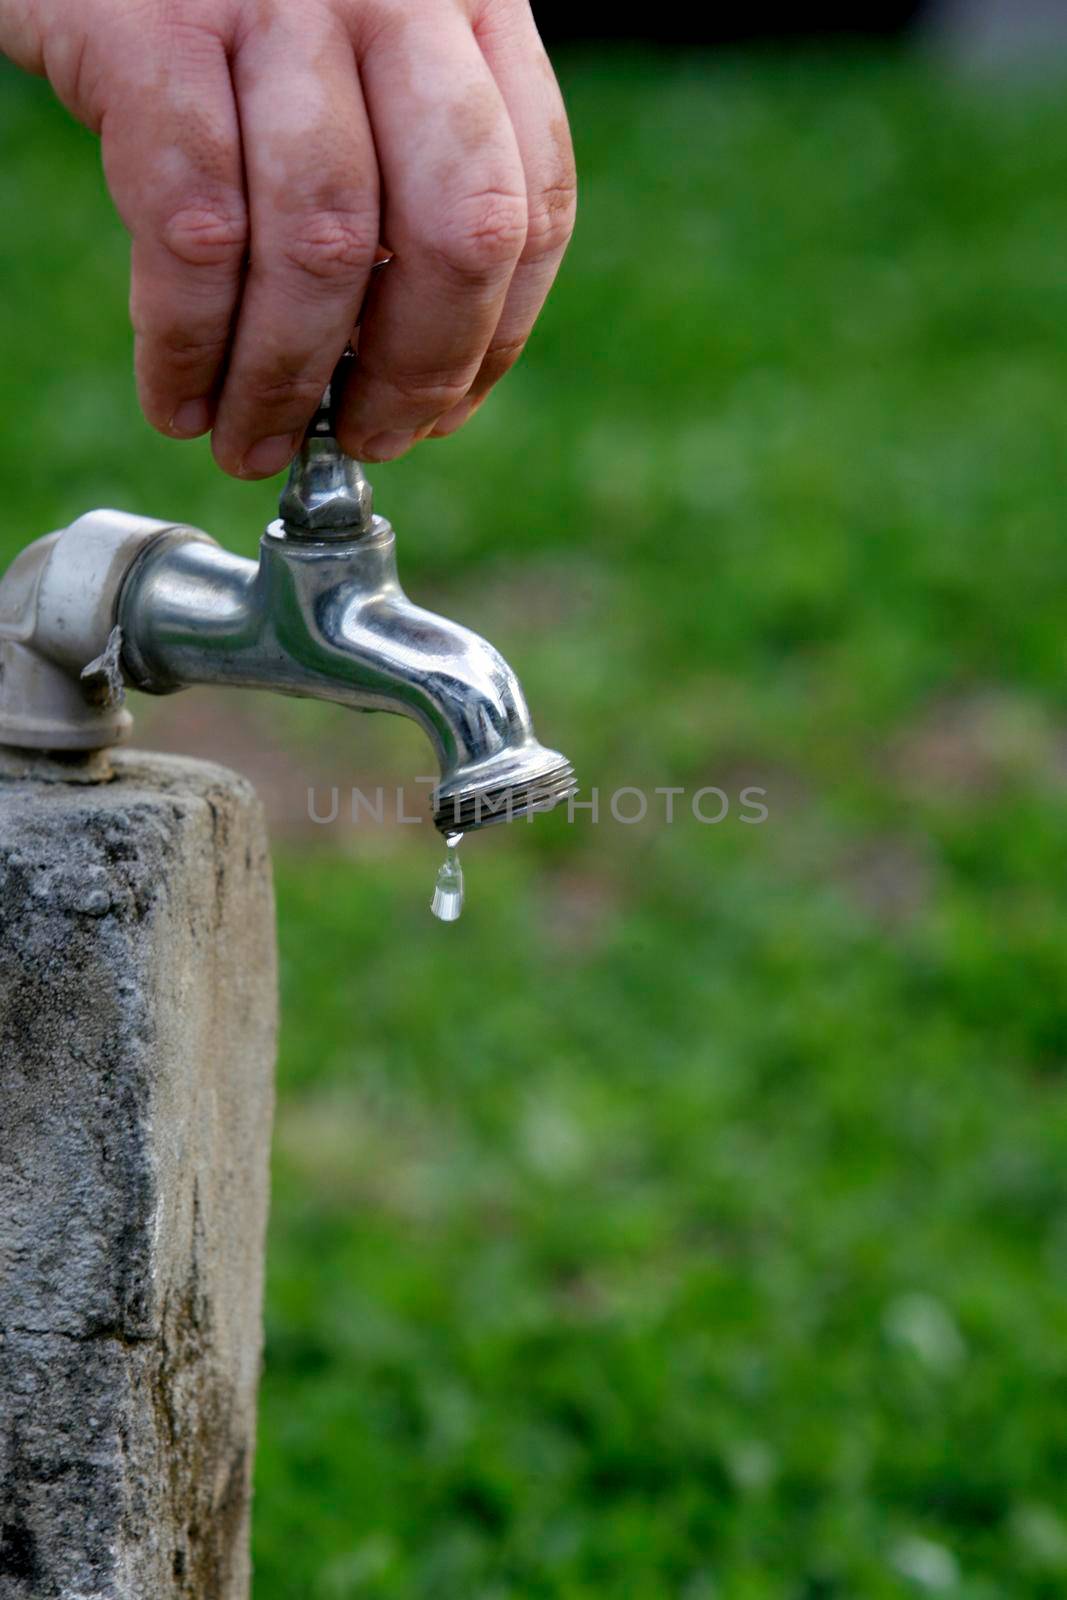 salvador, bahia / brazil - november 9, 2013: leaky faucet is seen in the city of Salvador.